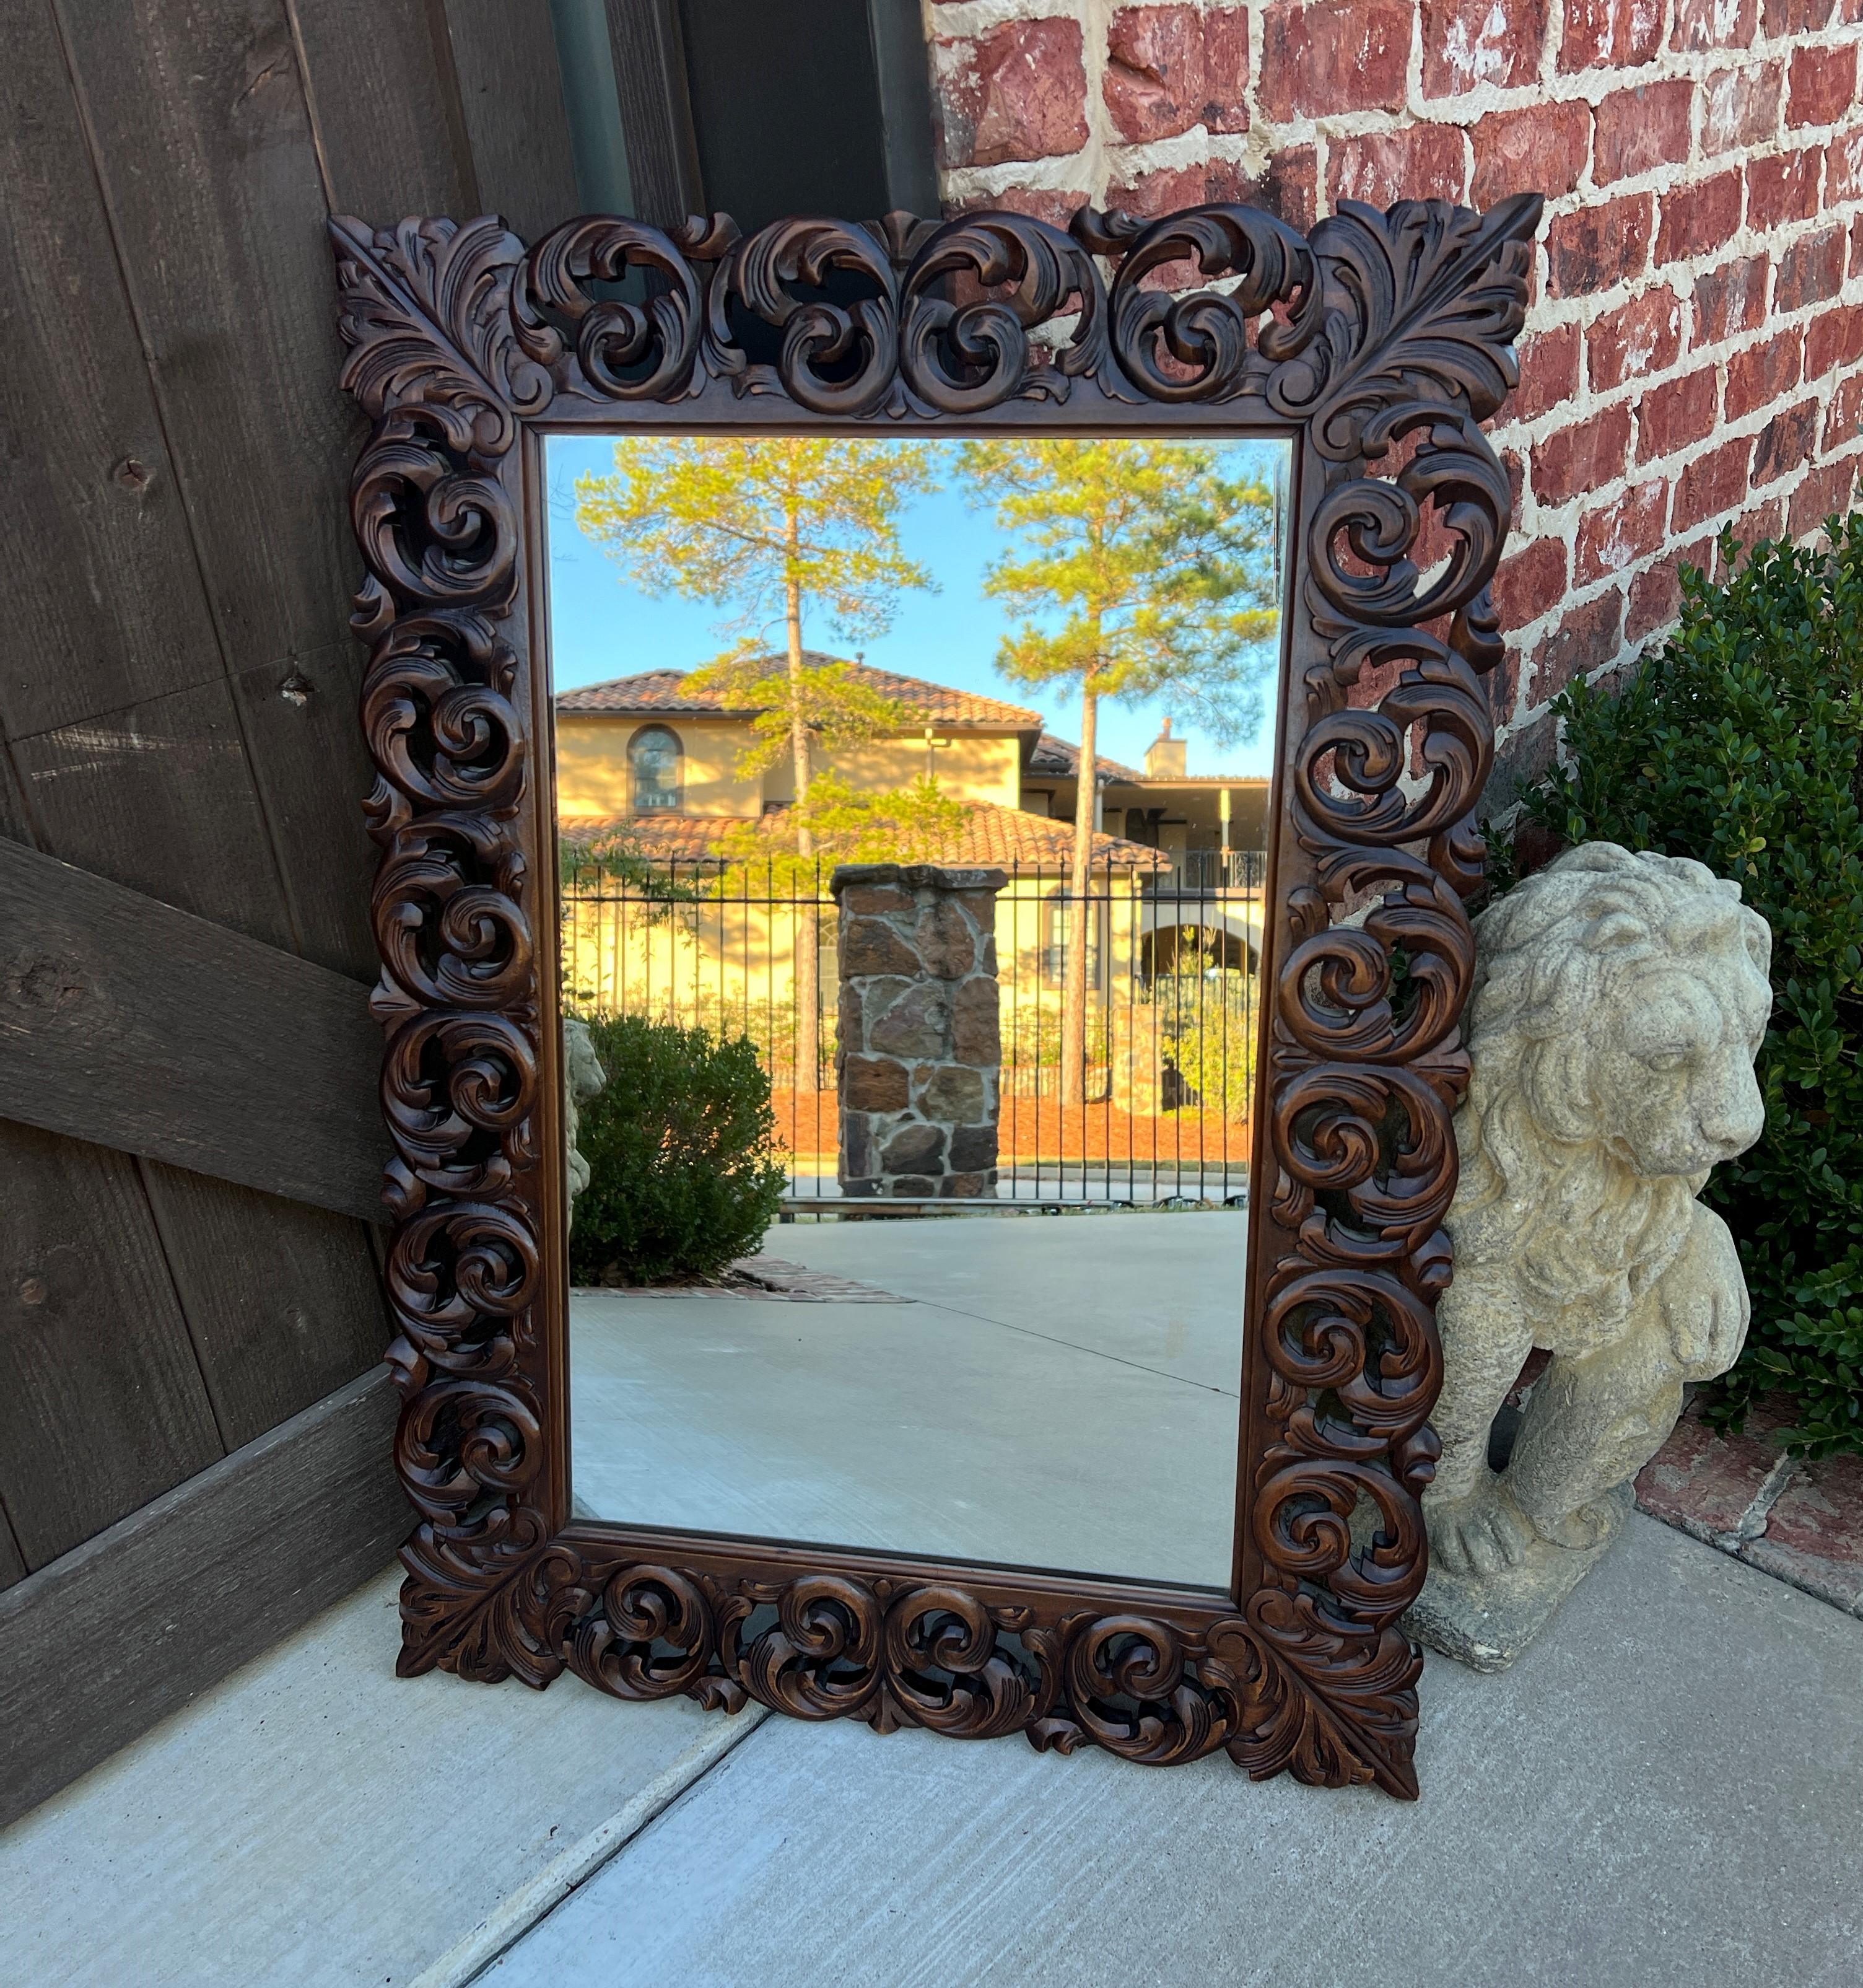 CHARMING Antique French Rectangular Framed Carved Oak Wall Mirror~~c. 1930s
  
 Popular French classic framed mirror~~perfect for an entry hall or powder room or just about any room in the house

 Versatile size

 Frame is 35.25